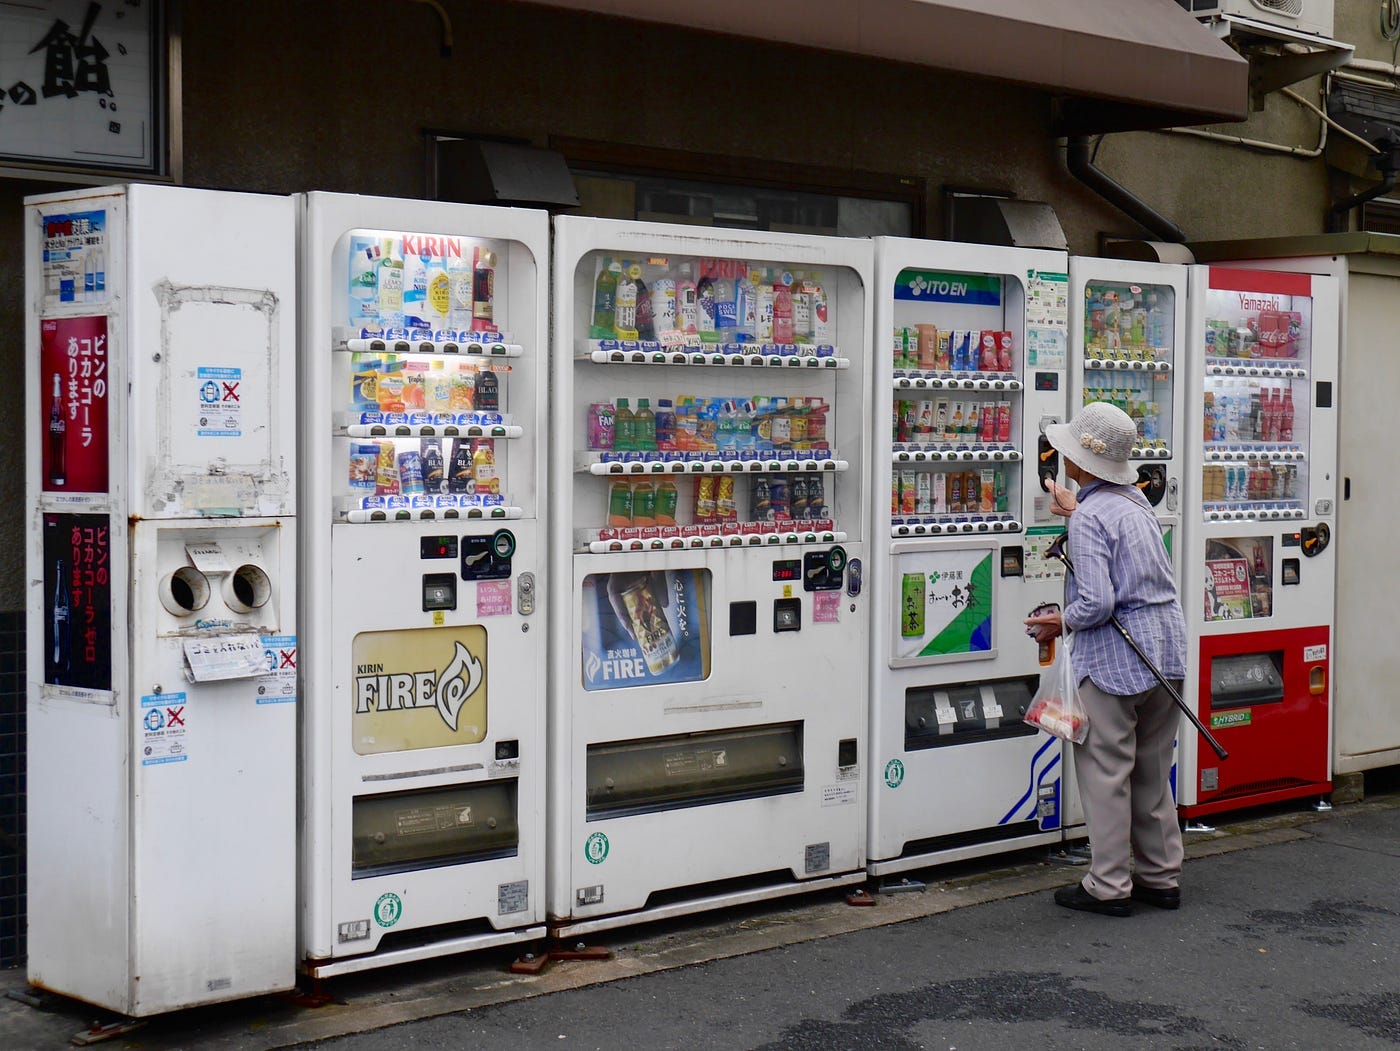 A woman trying to get something from a vending machine.